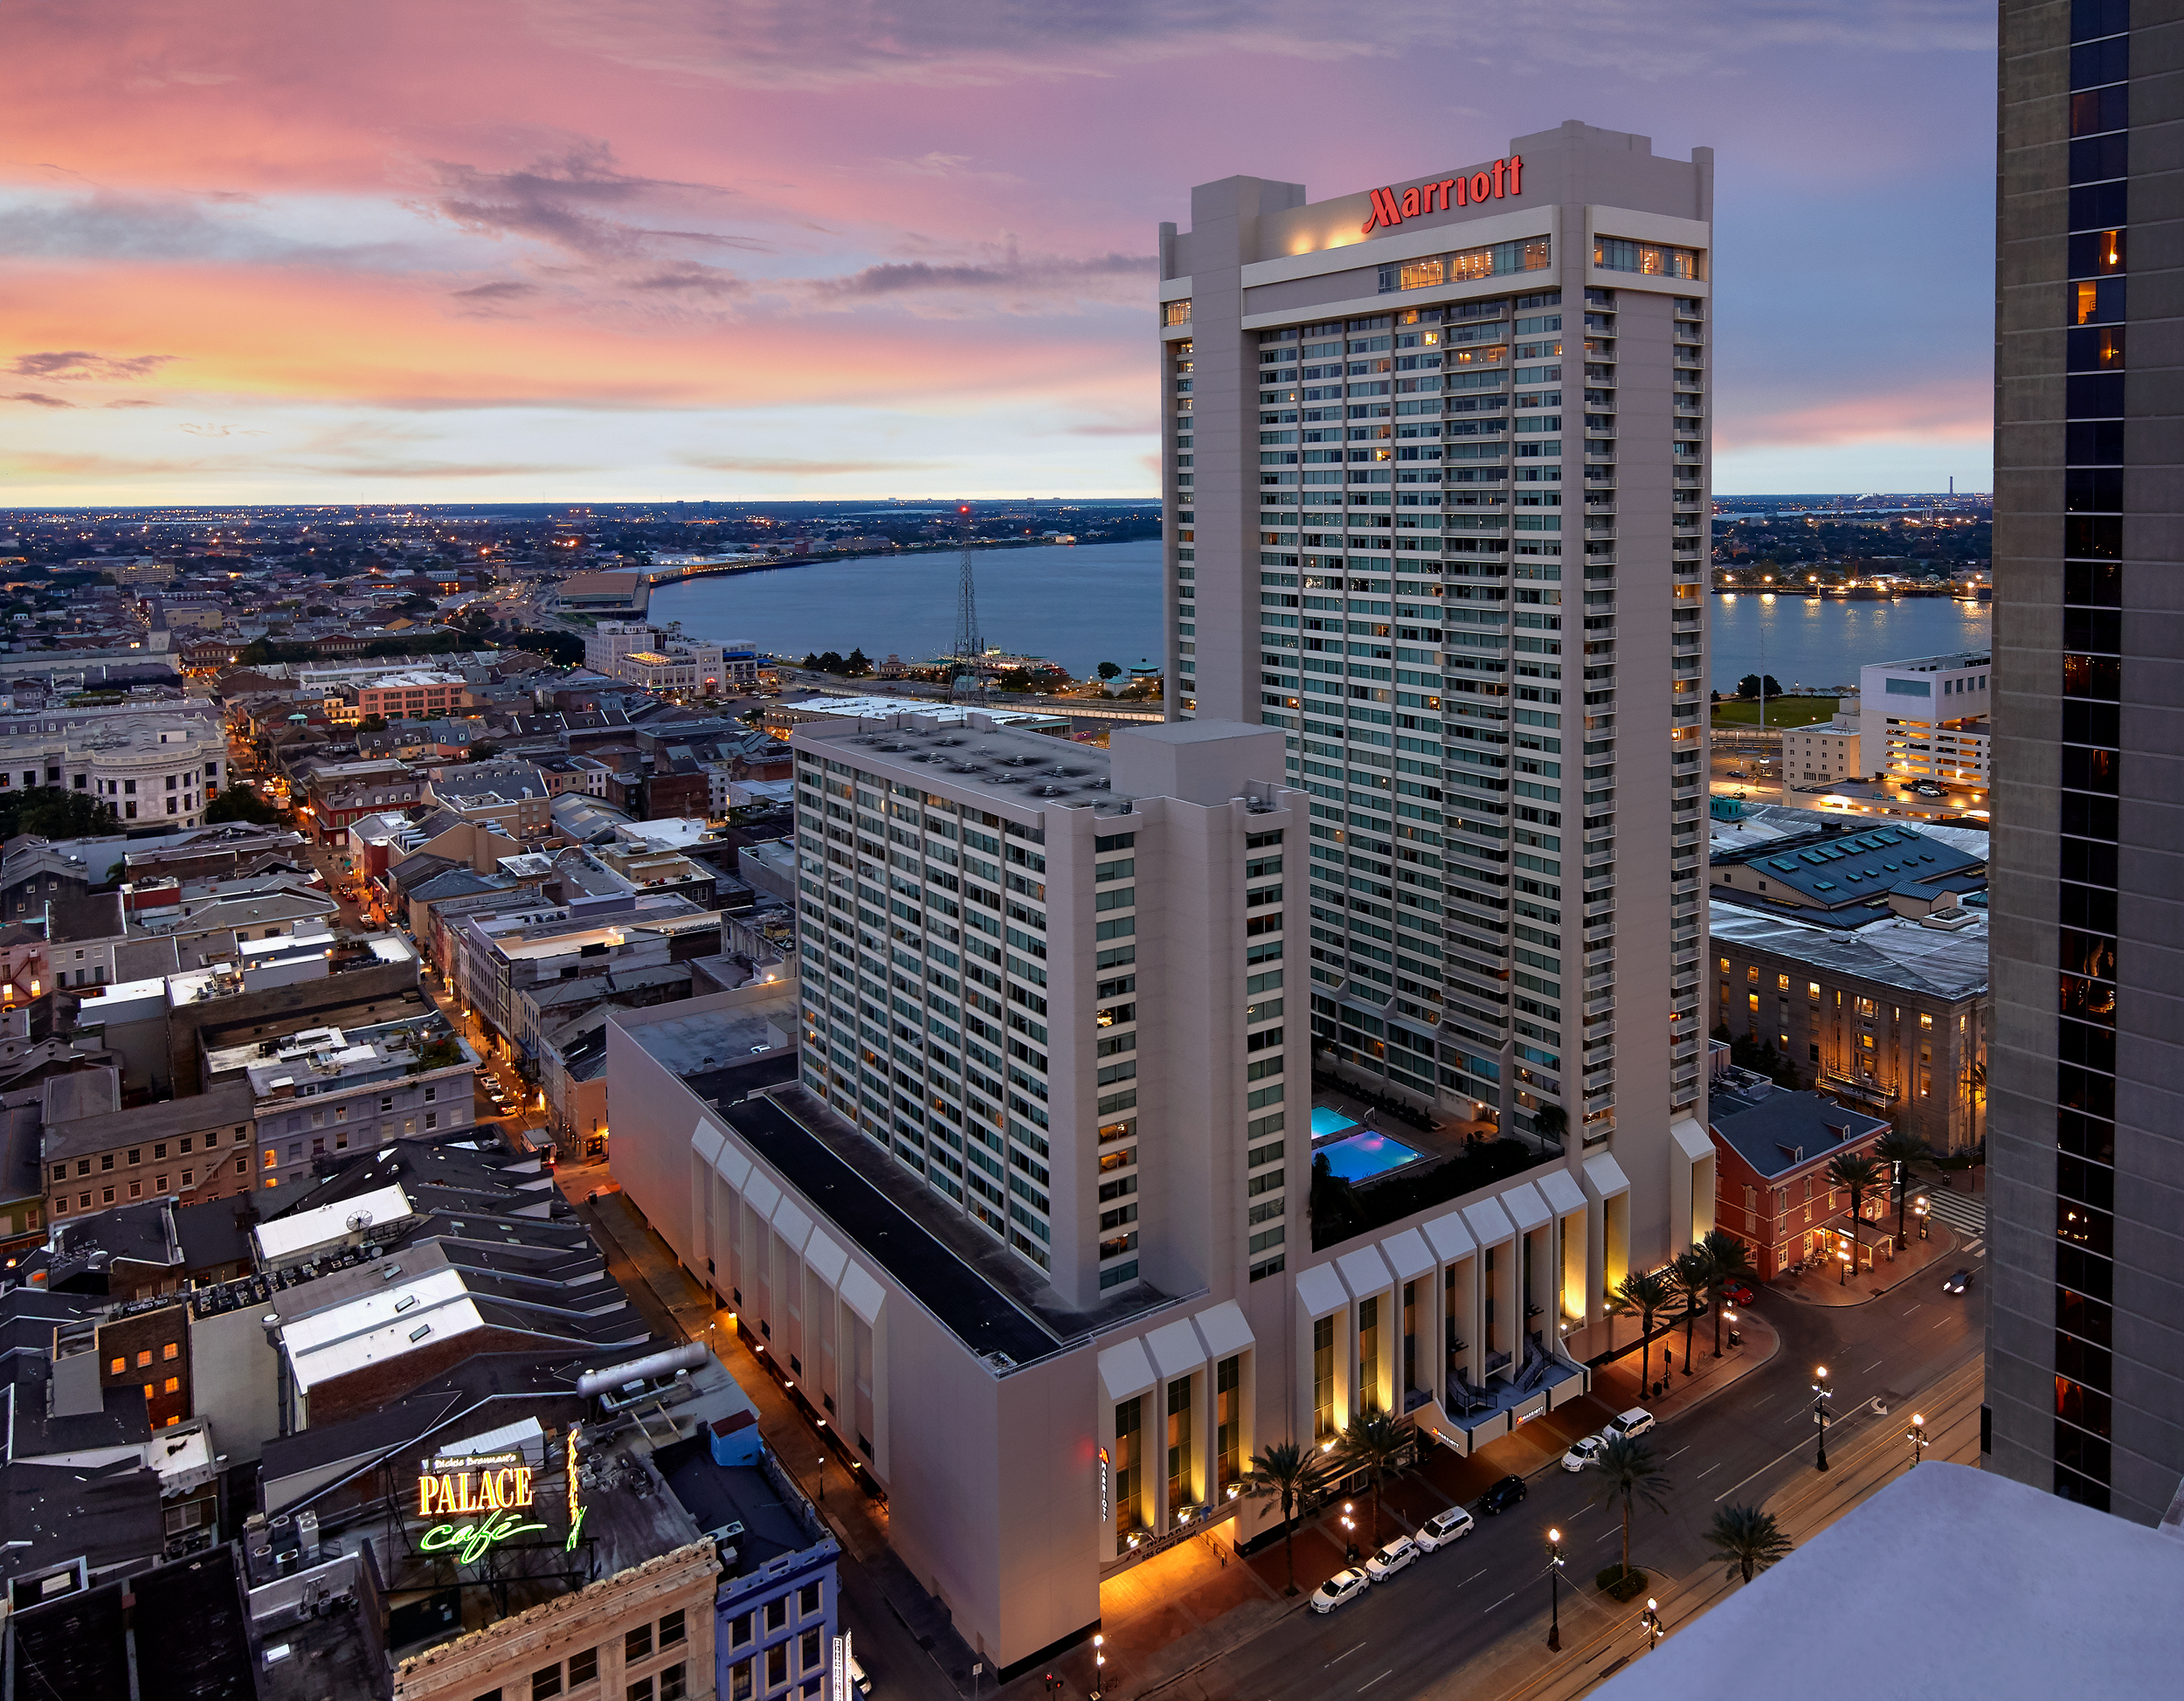 A photo of the Marriott in New Orleans, a tall building with smaller city buildings and a sunset behind it.